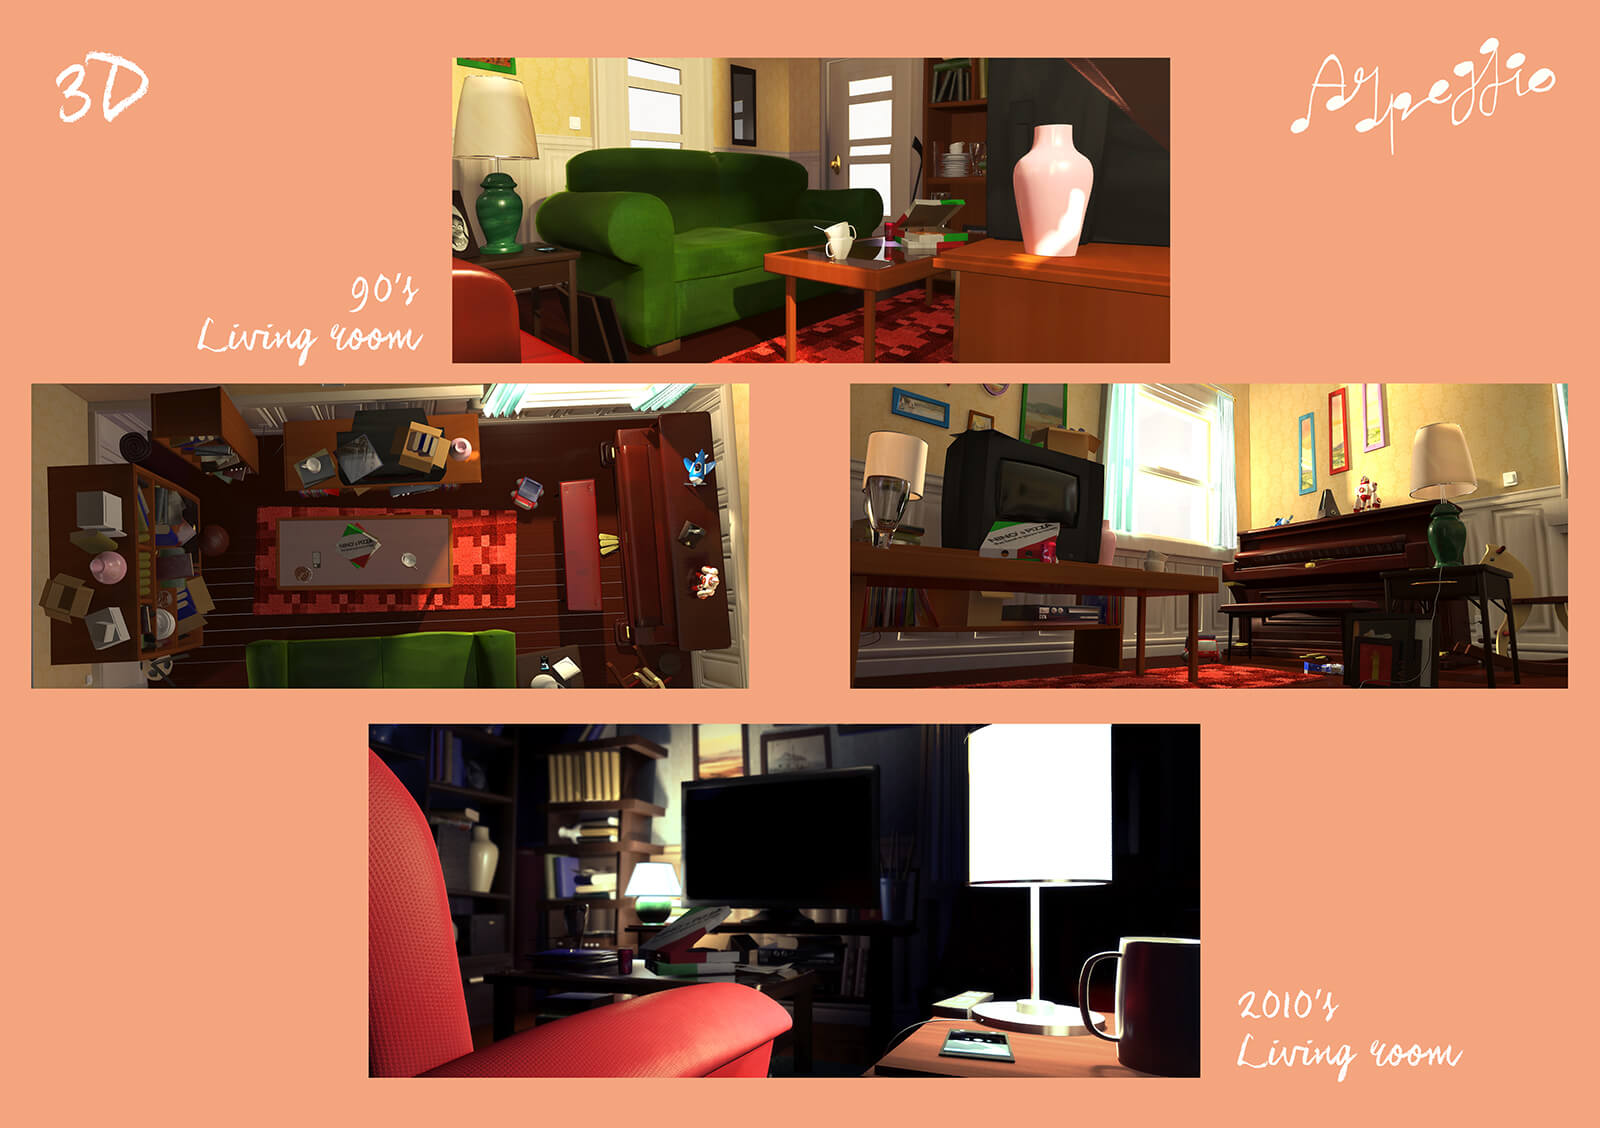 3D modeling of the living room setting in the film Arpeggio, both as it appeared in the 1990&#039;s and 2010&#039;s